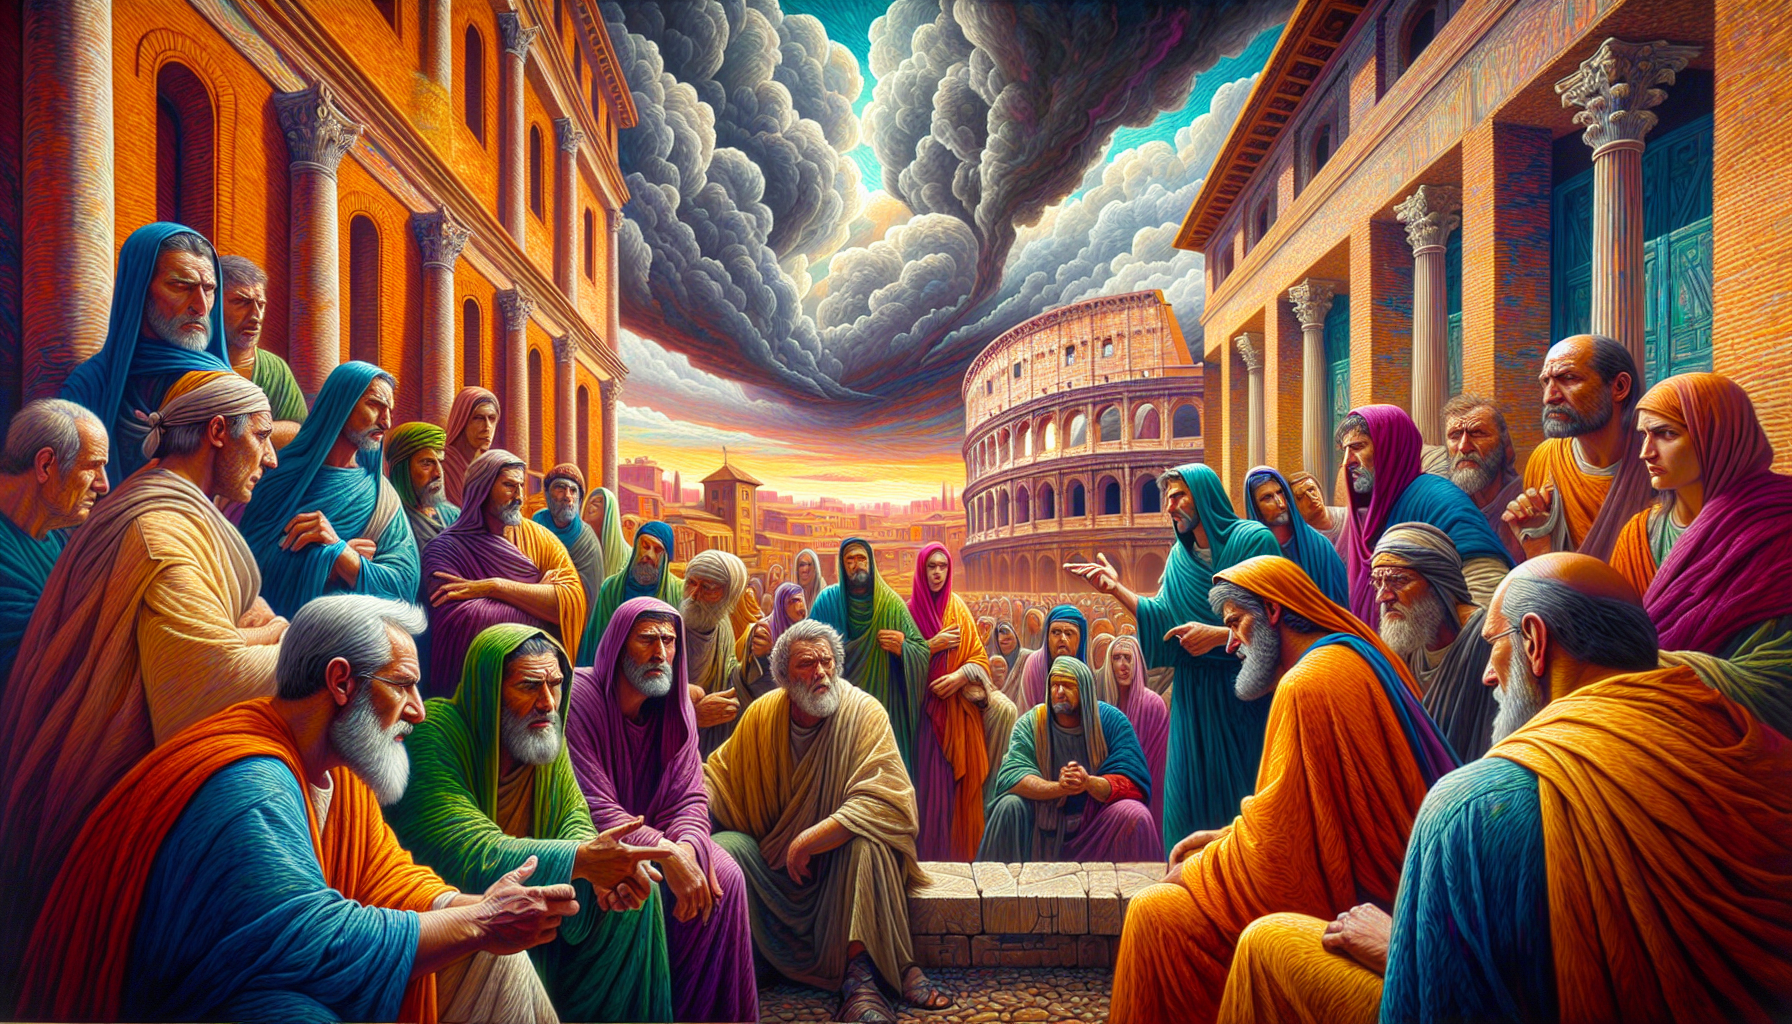 An artistic depiction of an intense discussion between Roman authorities and early Christians in an ancient Roman cityscape, highlighting the tension and perceived threat, with visible expressions of